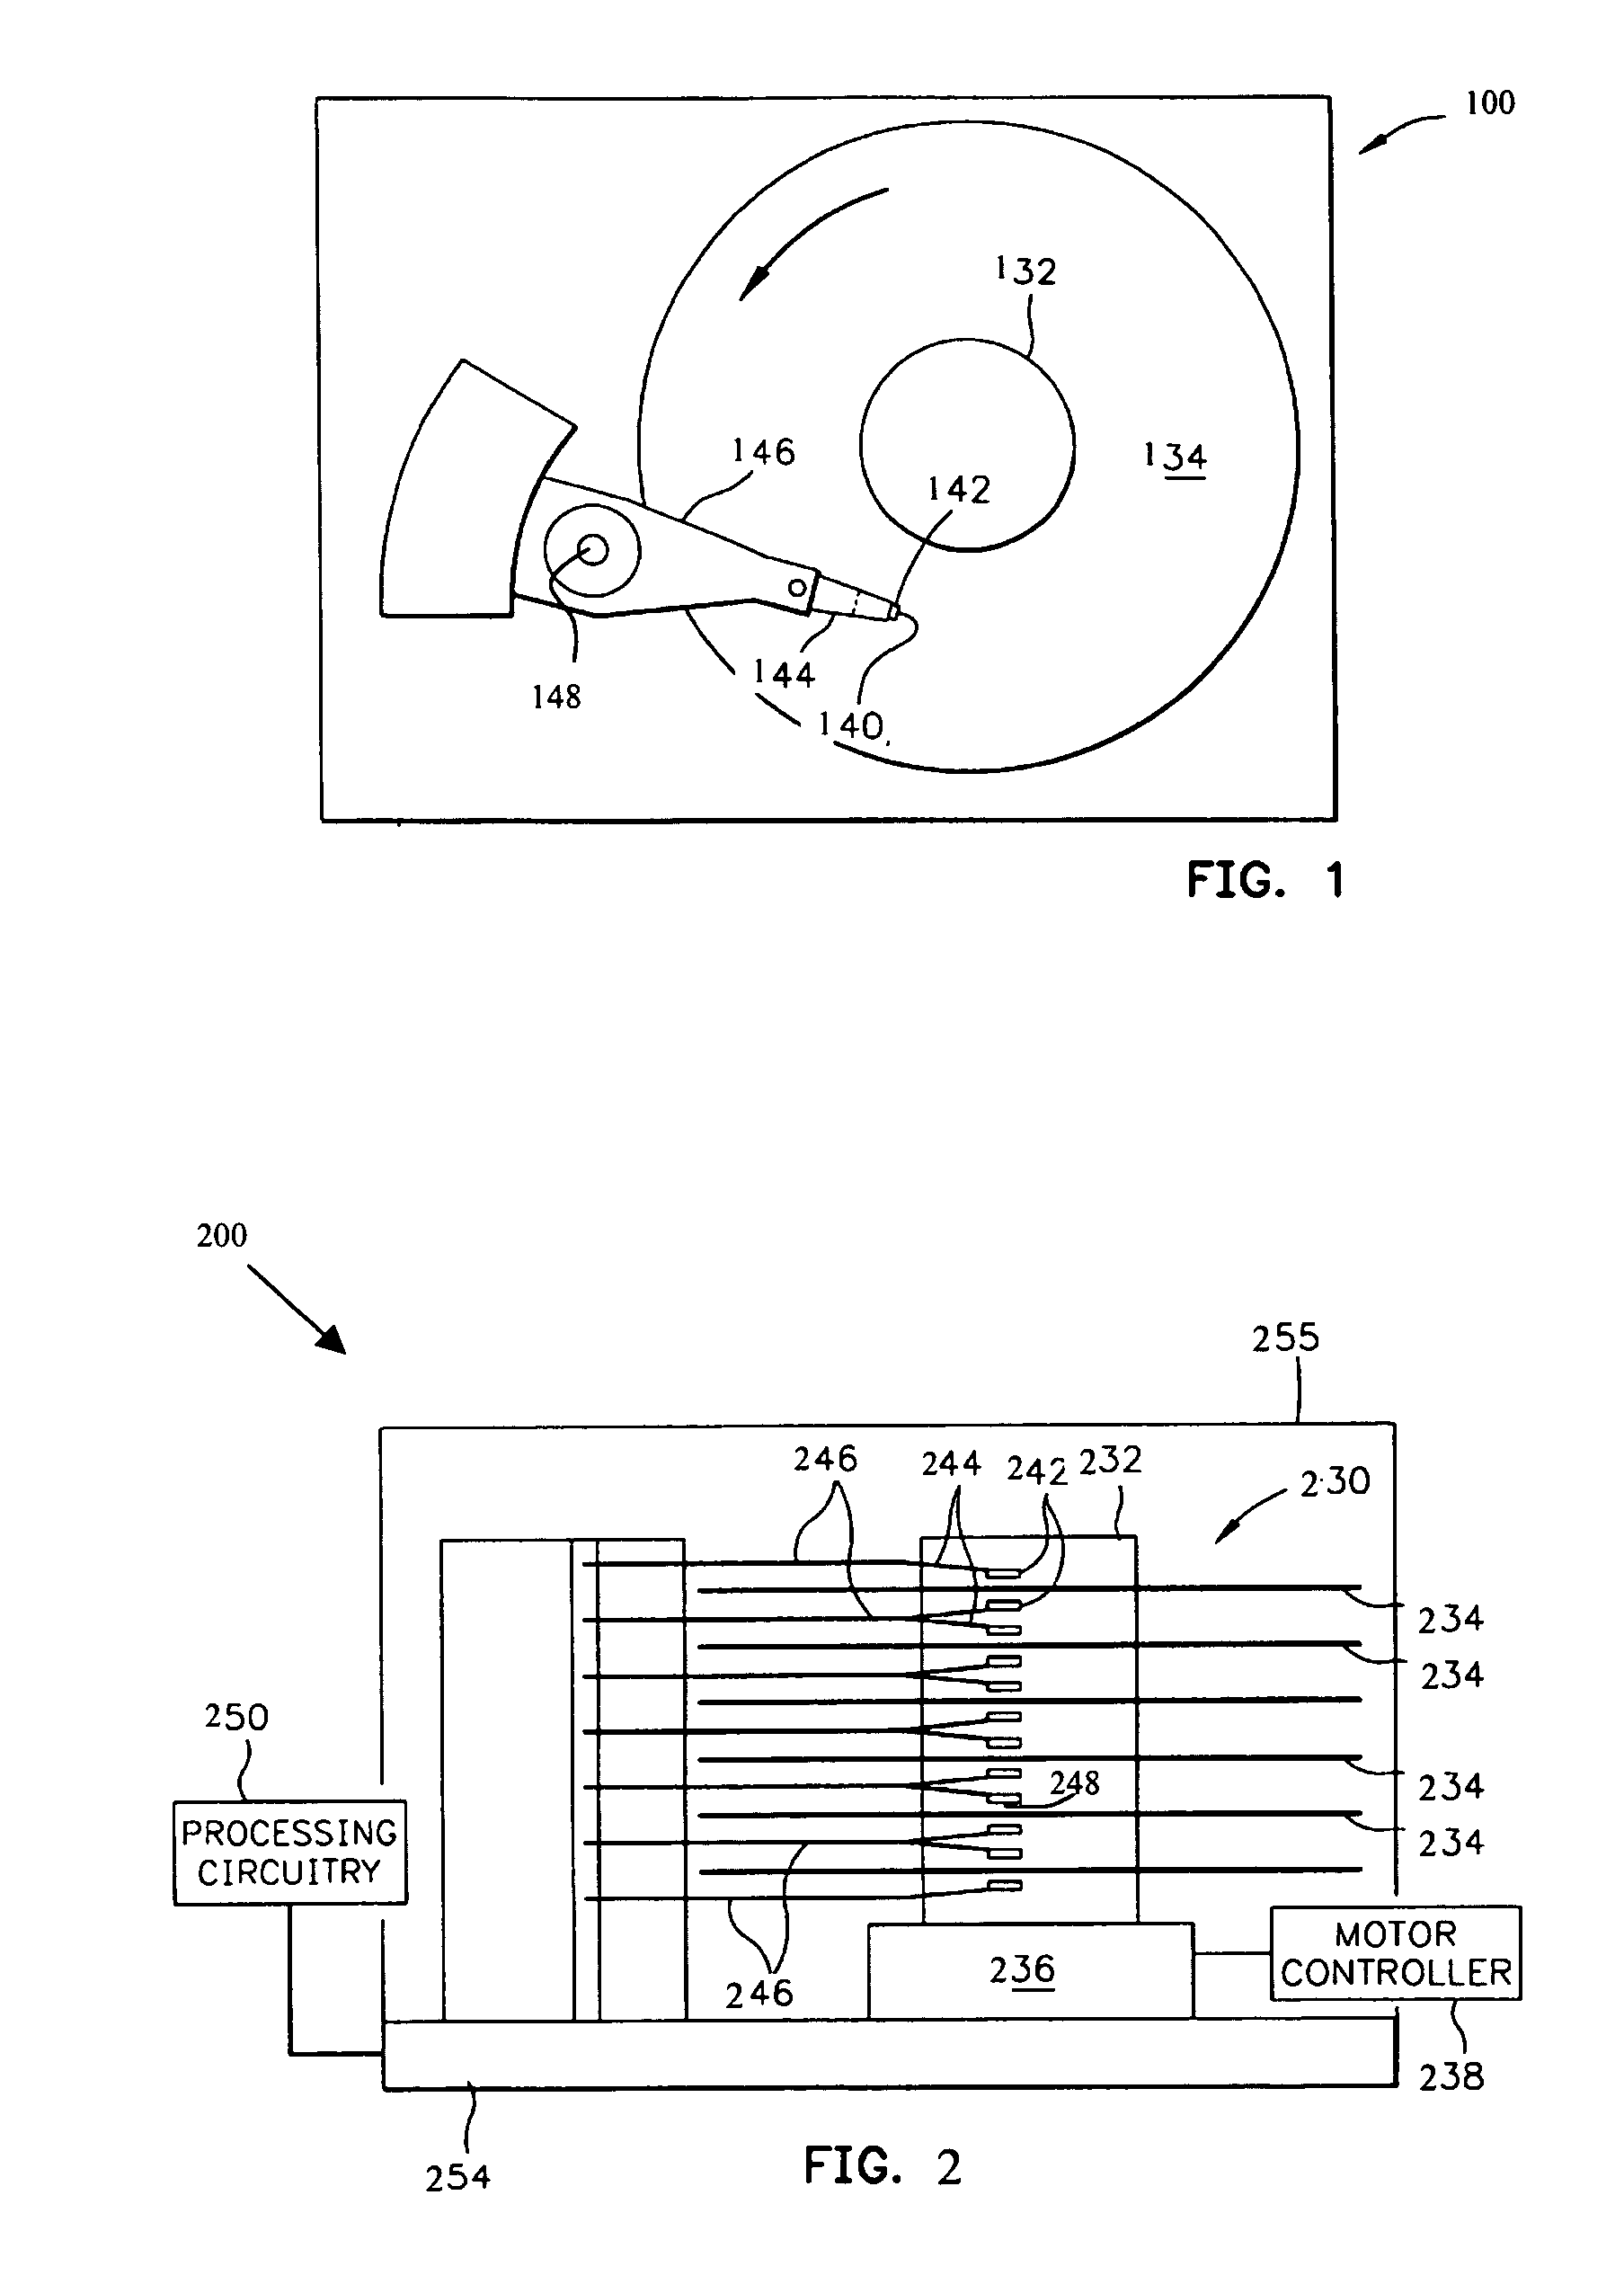 Method for providing transverse magnetic bias proximate to a pole tip to speed up the switching time of the pole-tip during the writing operation